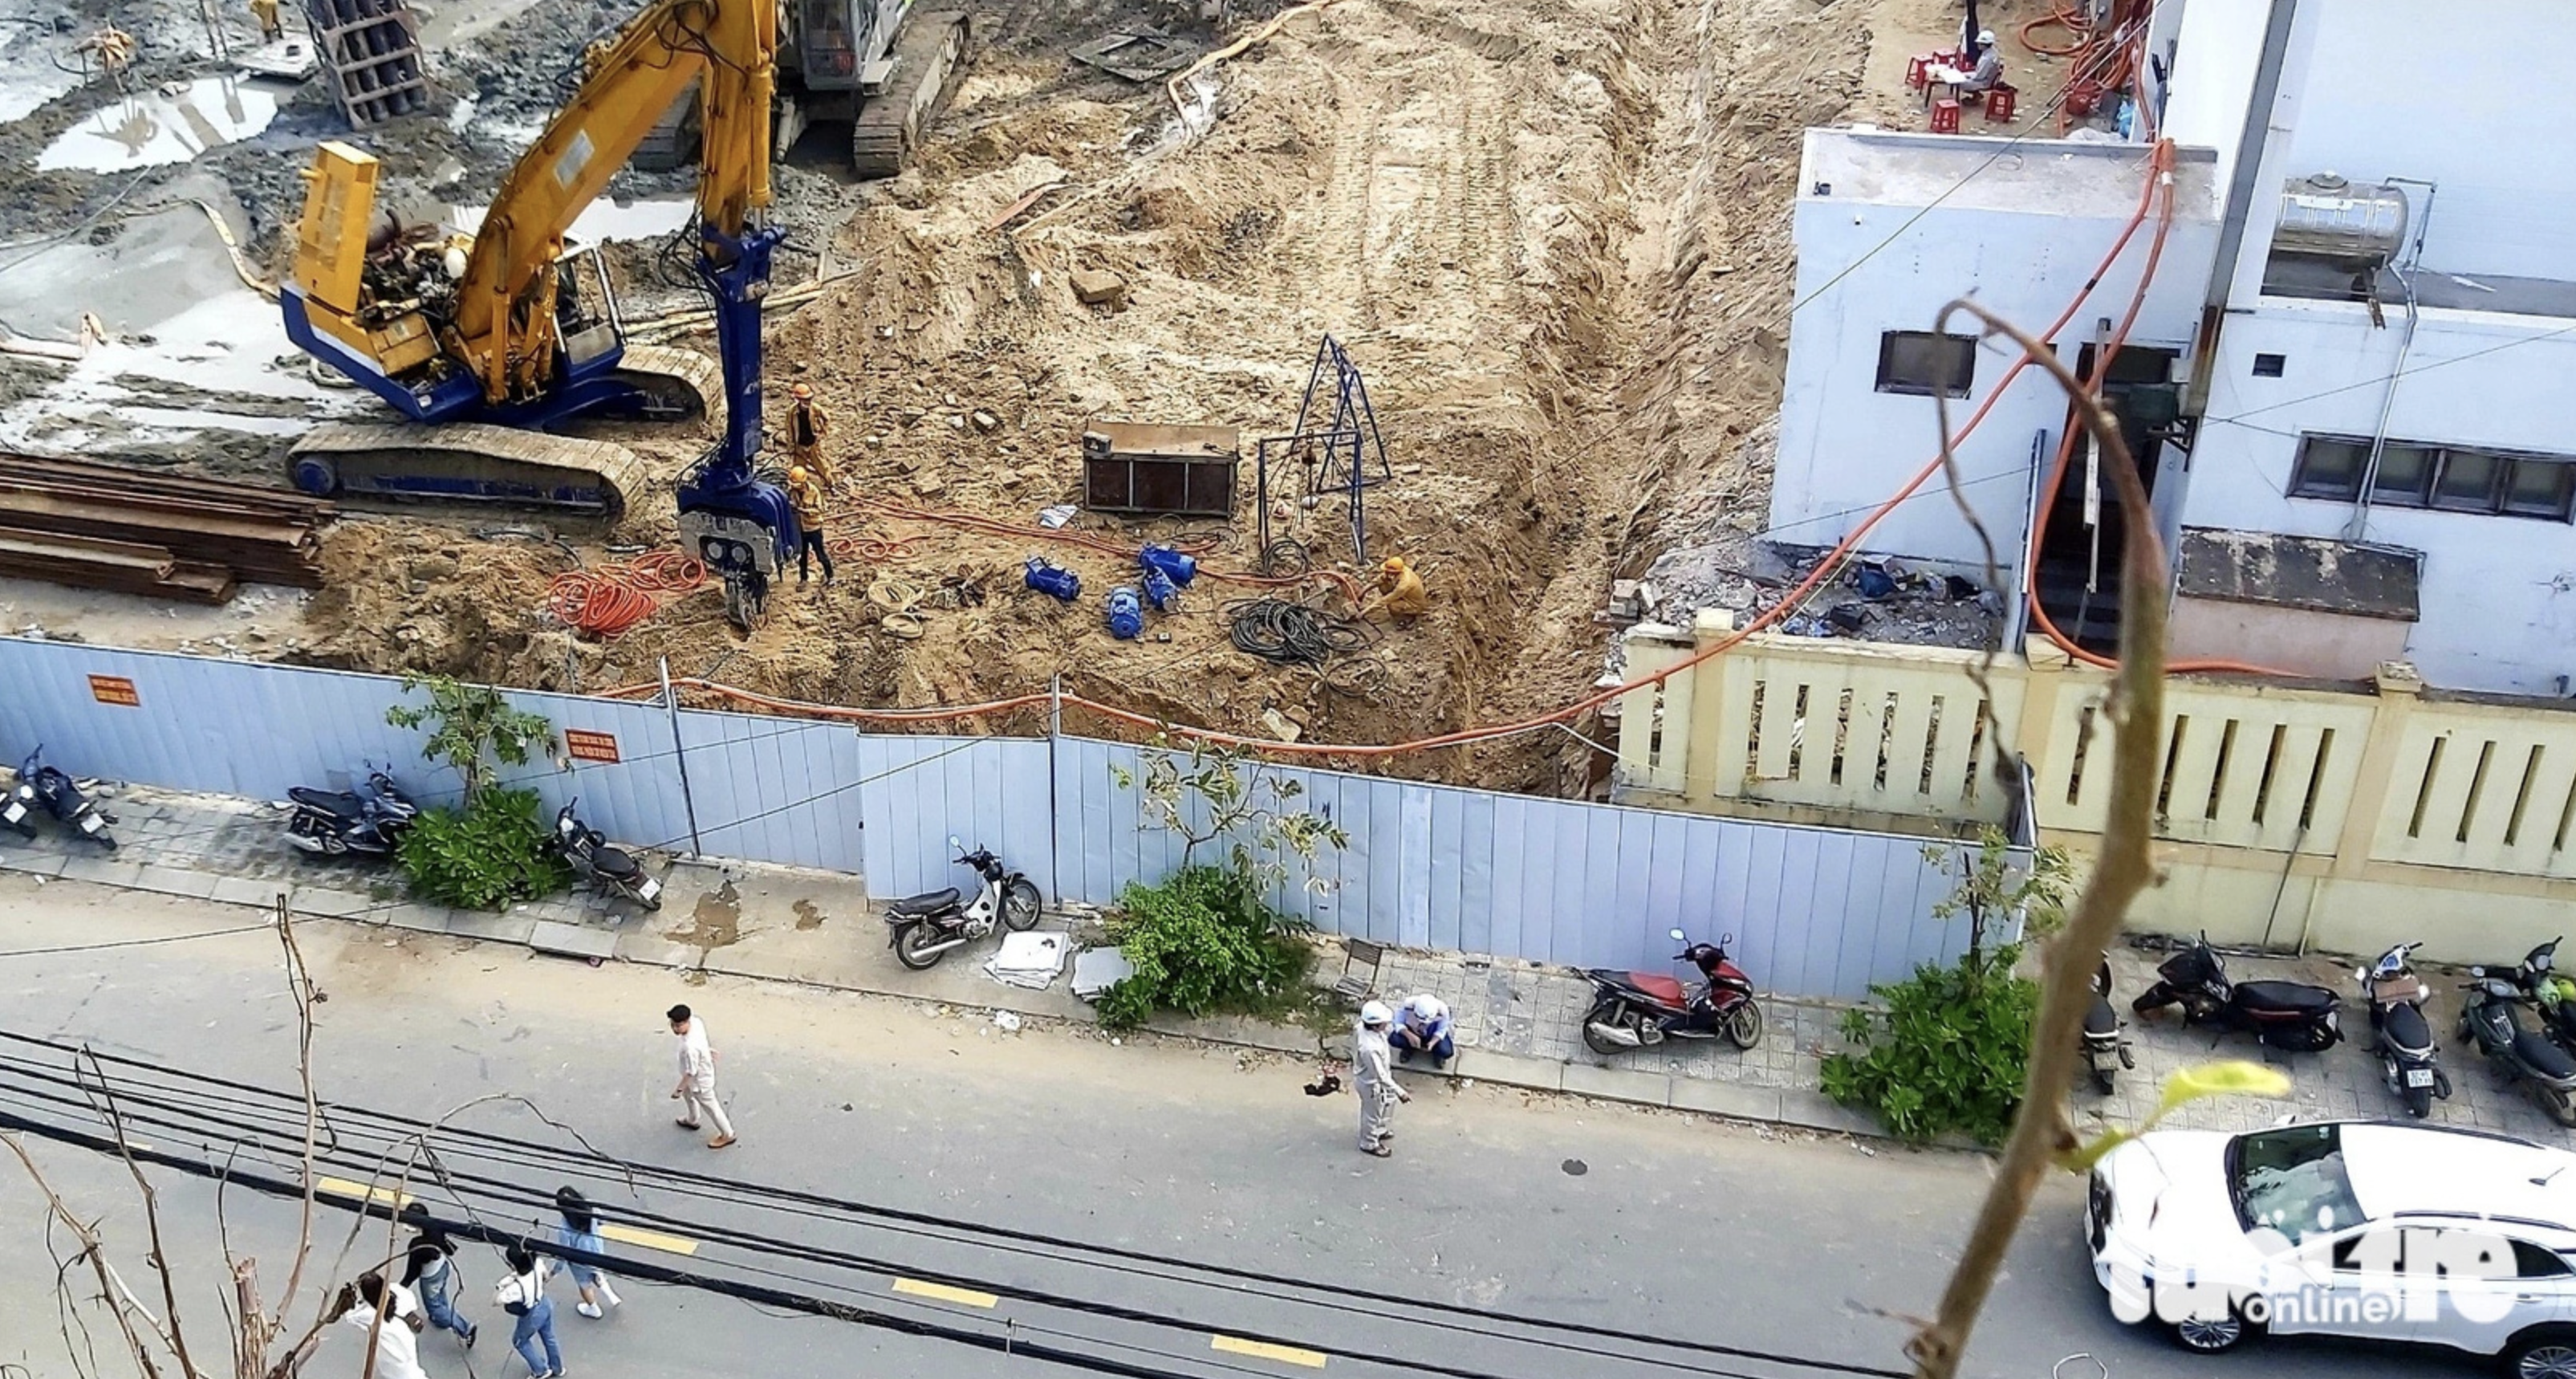 Residents and hoteliers asked the constructor of the project to execute it at a suitable time. Photo: Doan Cuong / Tuoi Tre